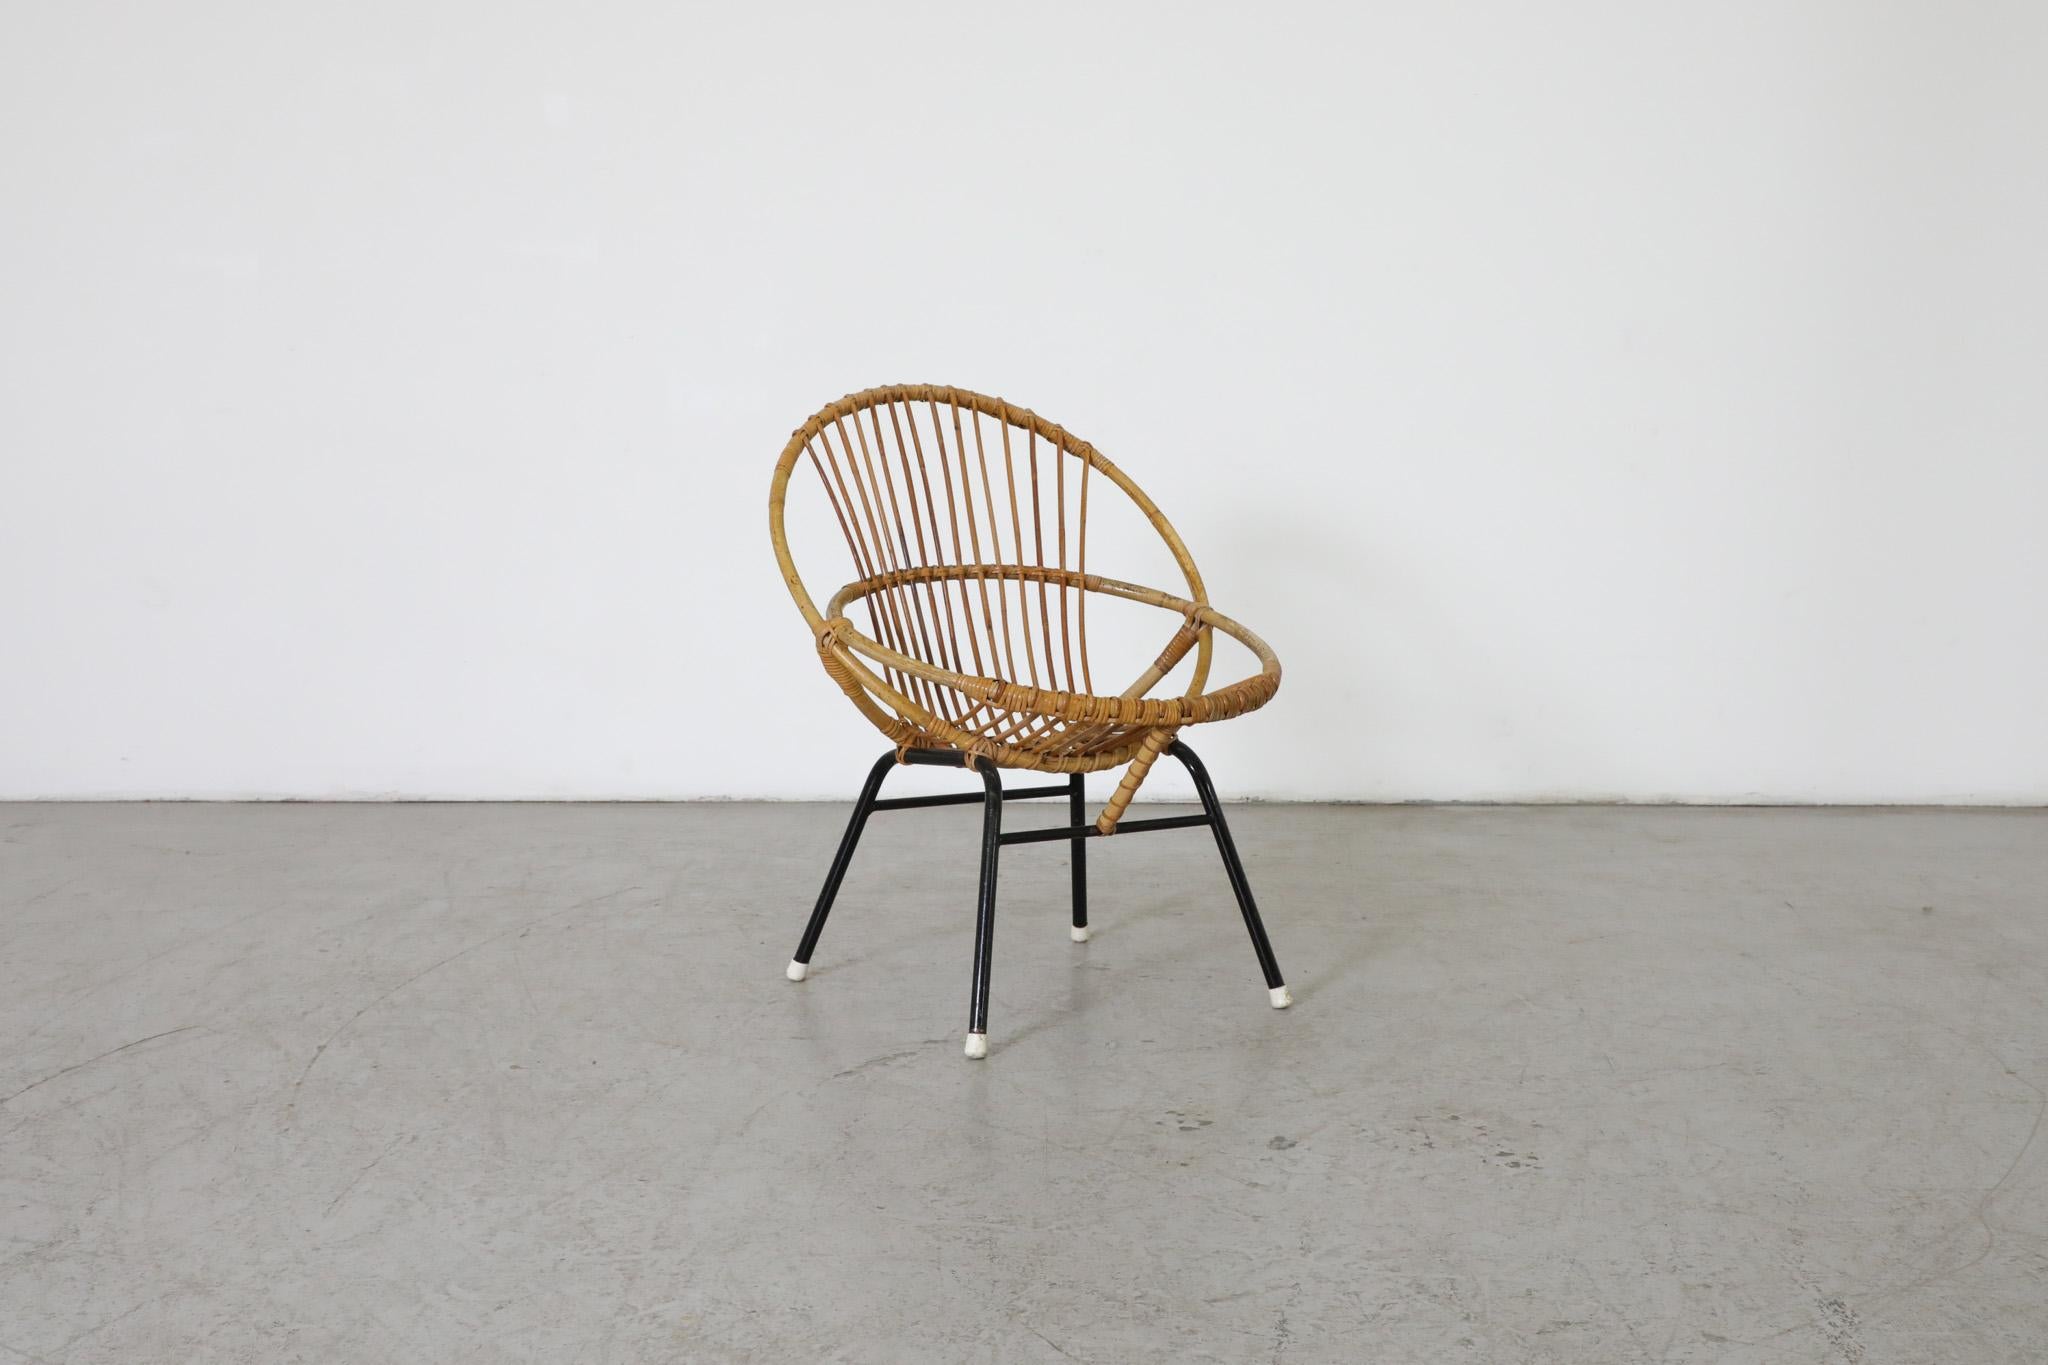 Cute little bamboo hoop chair with black enameled frame and white foot caps. Design attributed to Dutch Mid-Century icon Dirk van Sliedregt, renowned for his work that combined rattan and bamboo with sleek Mid-Century esthetics. In original